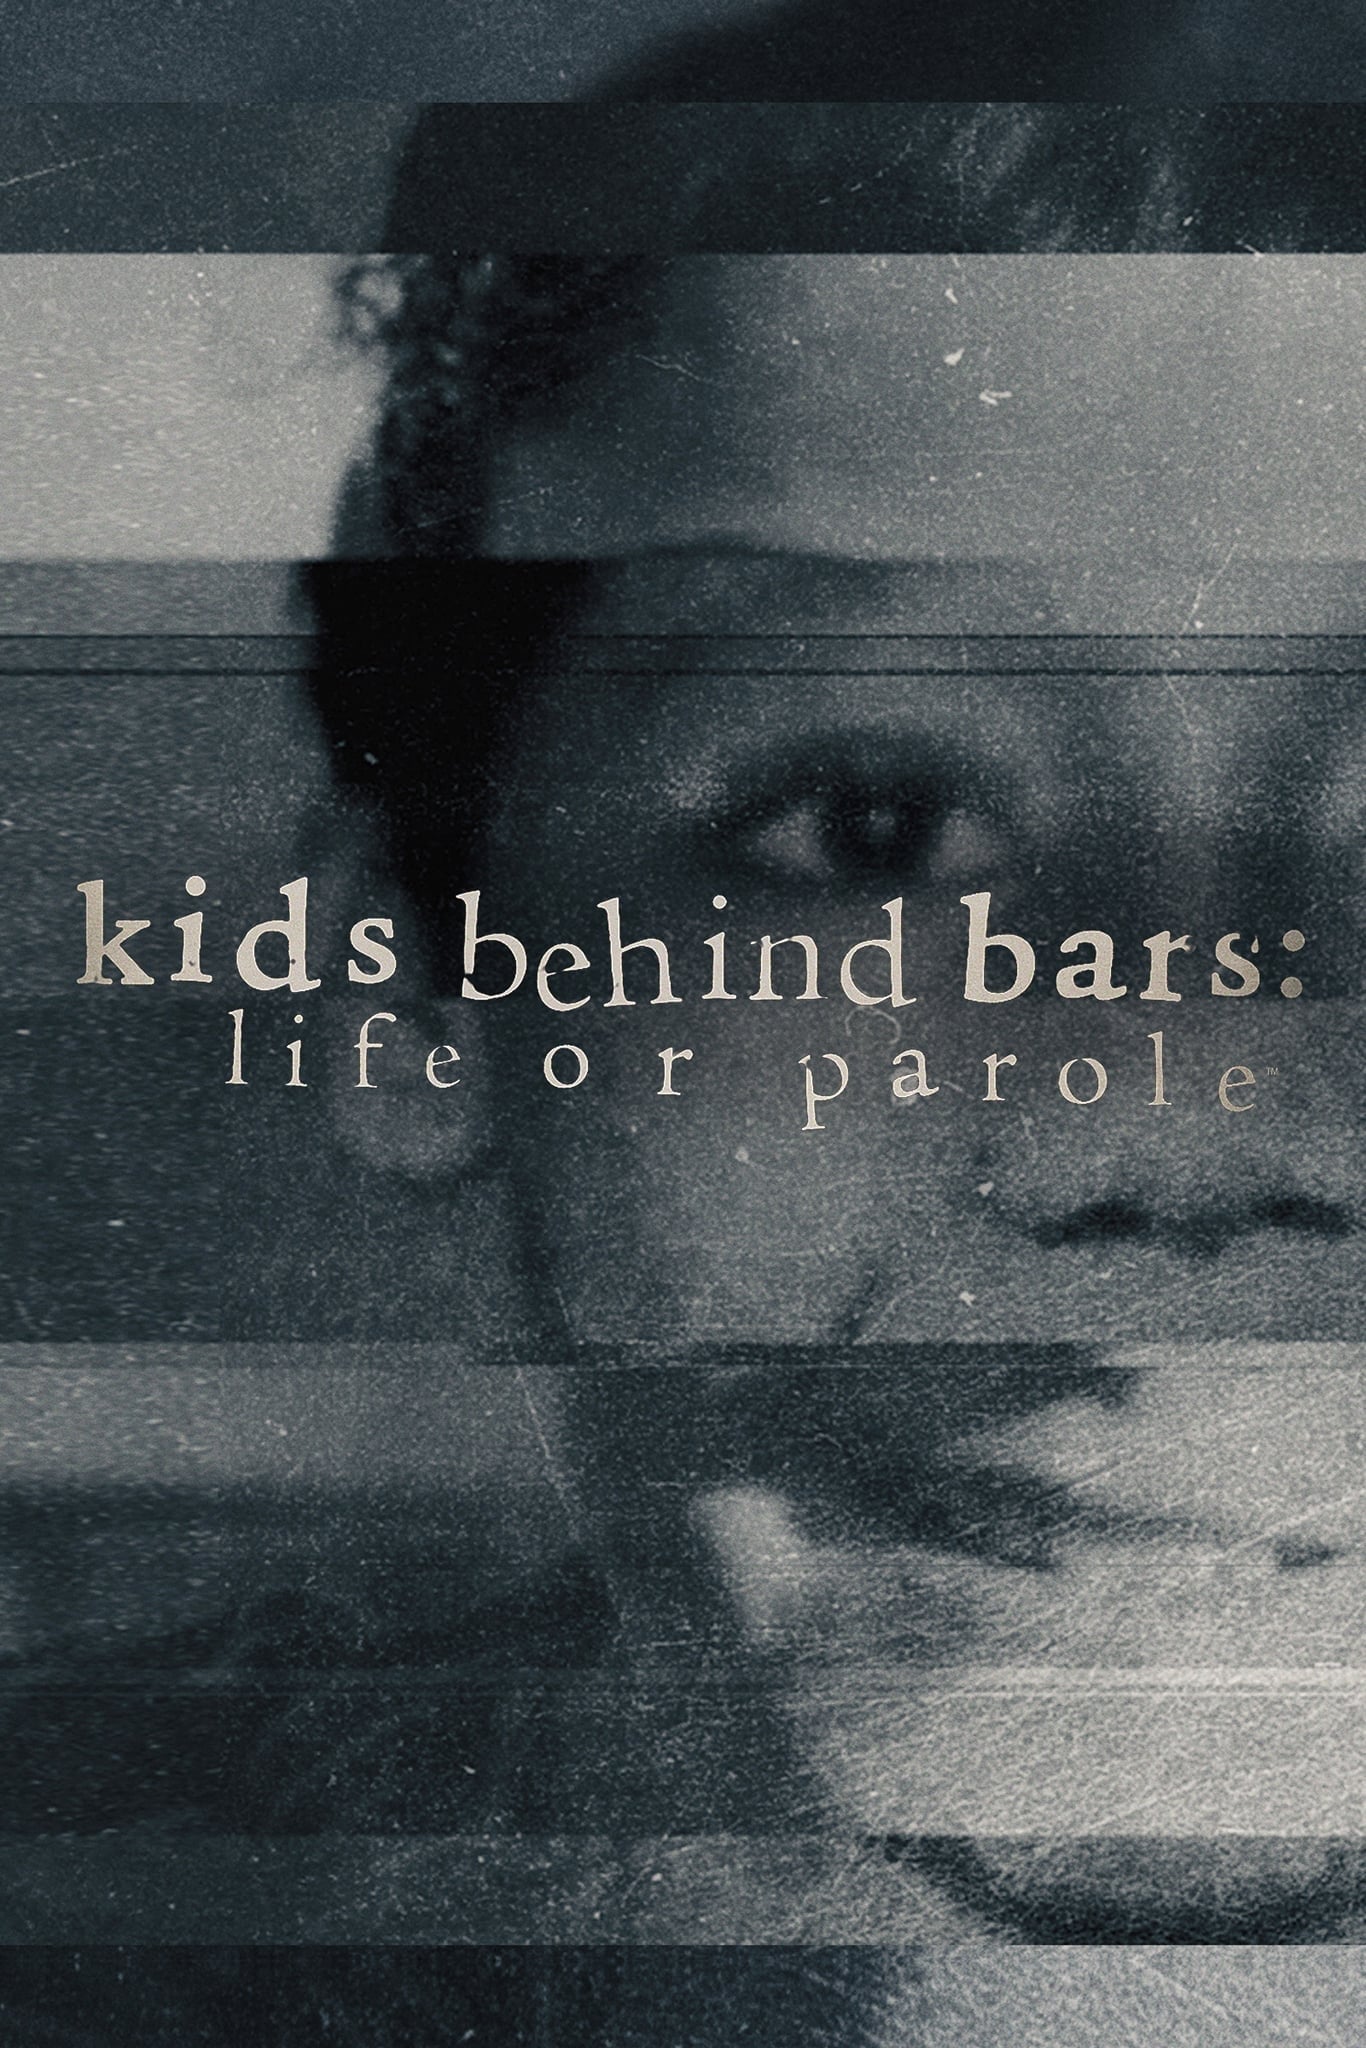 Kids Behind Bars: Life or Parole TV Shows About Prison